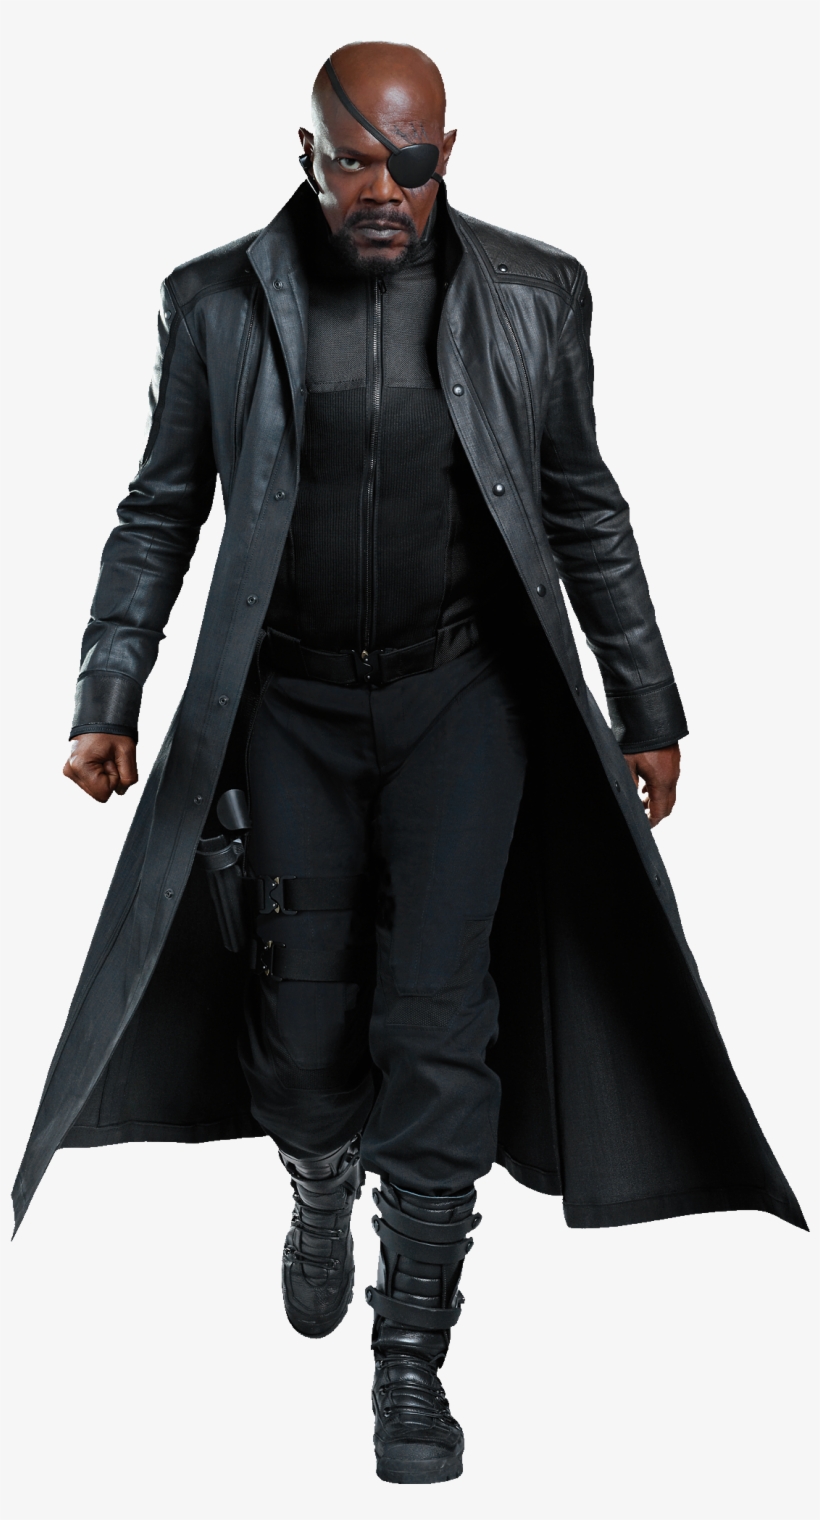 Fury7 Avengers - Nick Fury Avengers Png, transparent png #163131